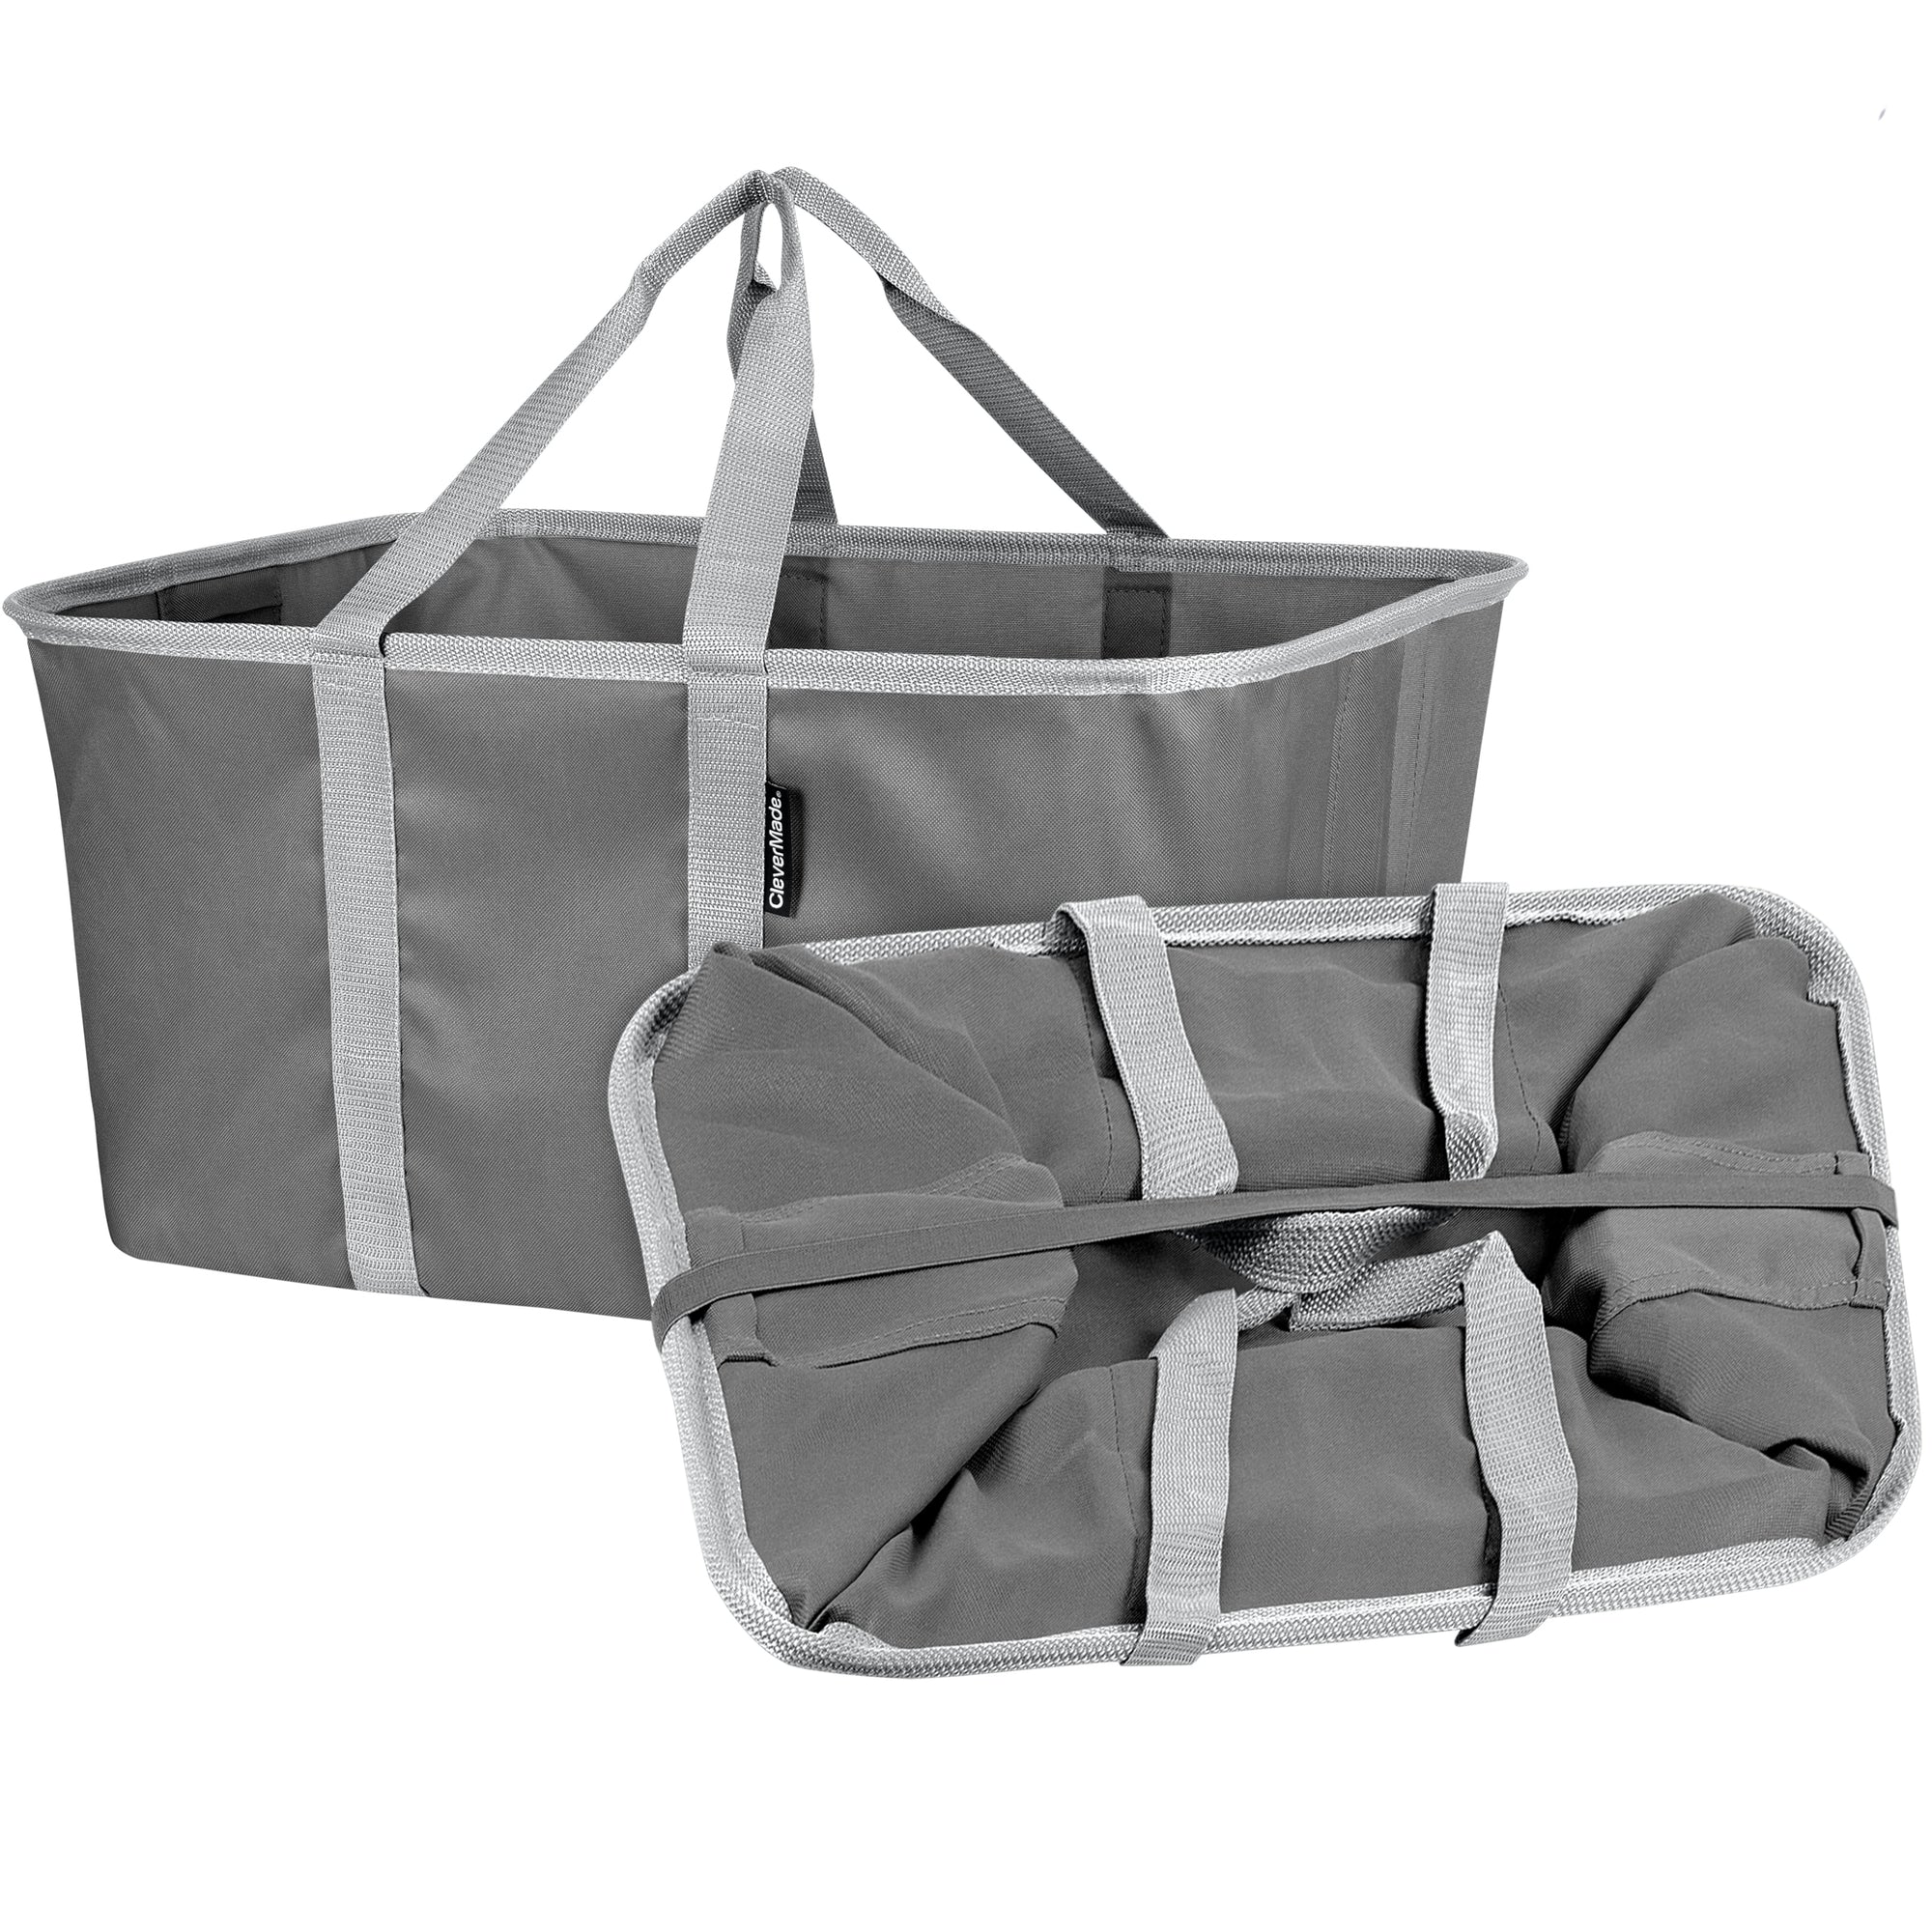 Collapsible Laundry Basket Tote